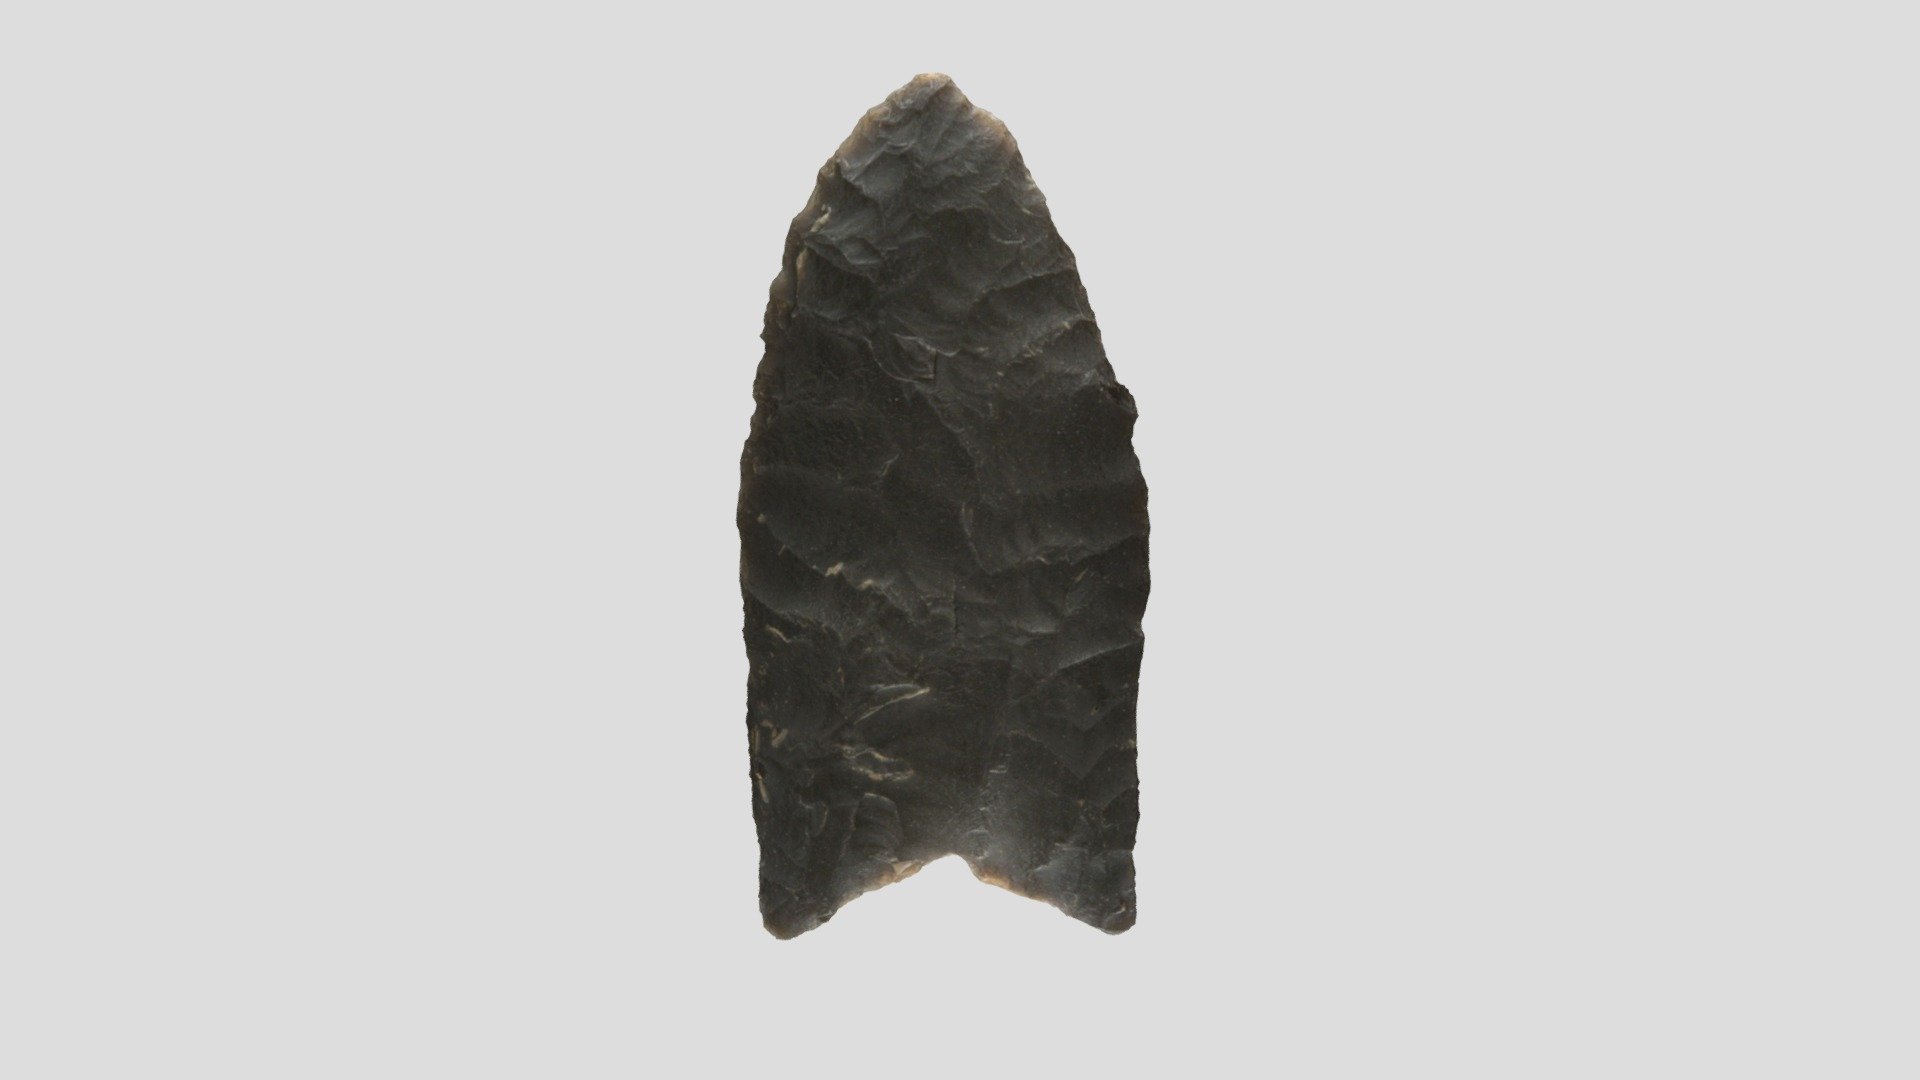 Discovered in Watauga County, NC in 1994 by Margot Birckhead.
Pleistocene-aged Clovis point made of black Chert from the Knox formation. 
Weight: 5.1g
Length: 41.36mm
Width: 19.81mm
Thickness: 5.13mm
The point was presented for custody to the Eastern Band of Cherokee Indians in 2016 3d model